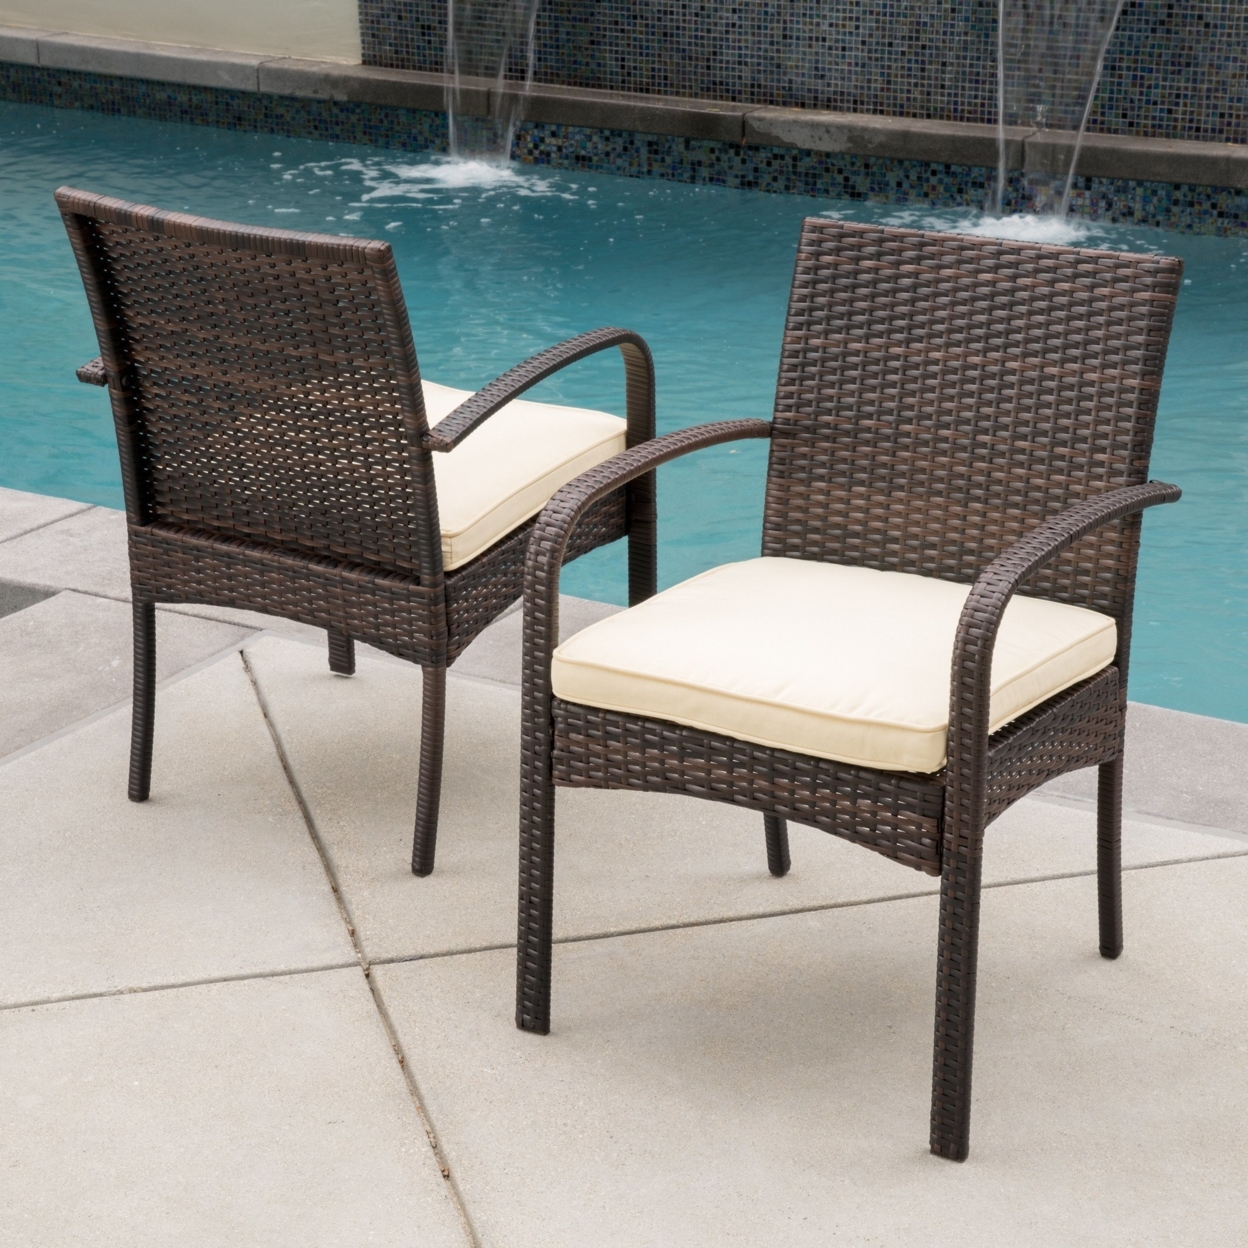 Carmela Outdoor Multibrown PE Wicker Dining Chairs (Set Of 2)